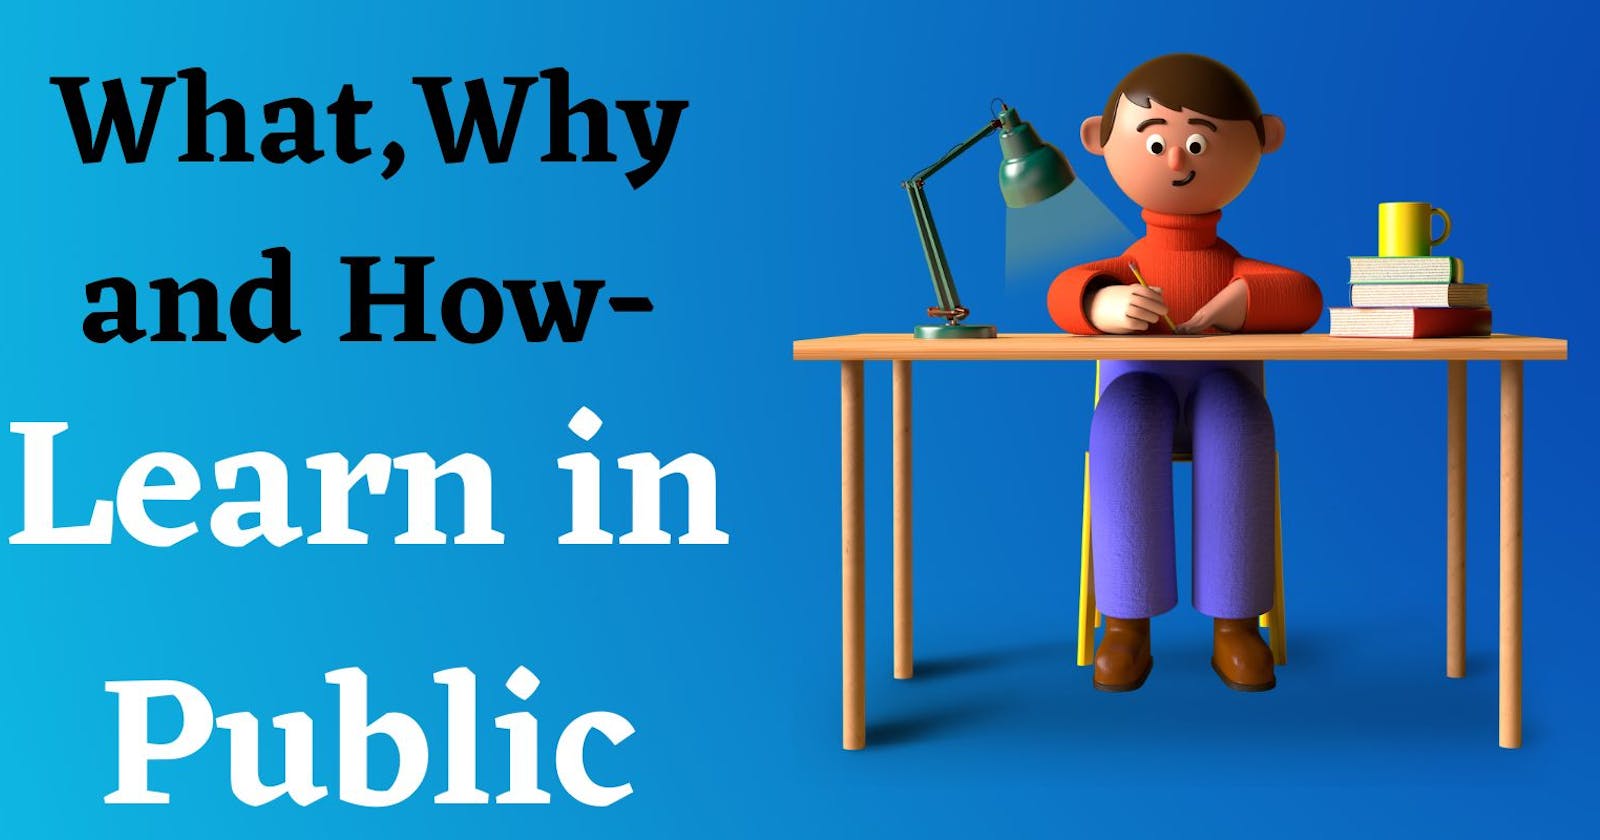 What, Why, and How -Learn in public?